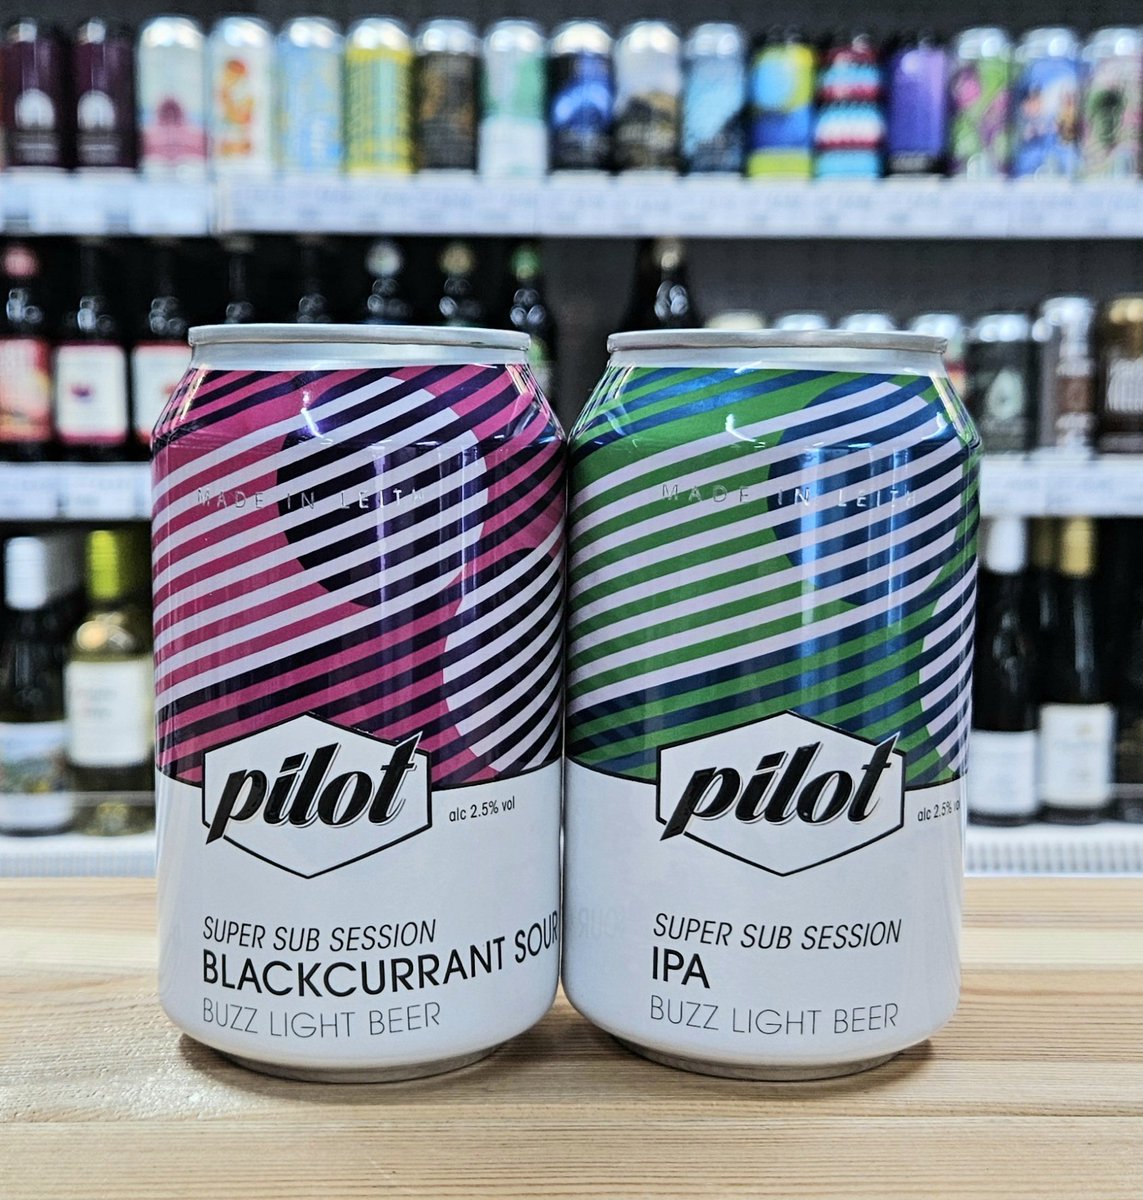 Two new beers from @pilotbeeruk Super Sub Session beers Blackcurrant Sour 2.5% IPA 2.5% #CraftBeer #Edinburgh